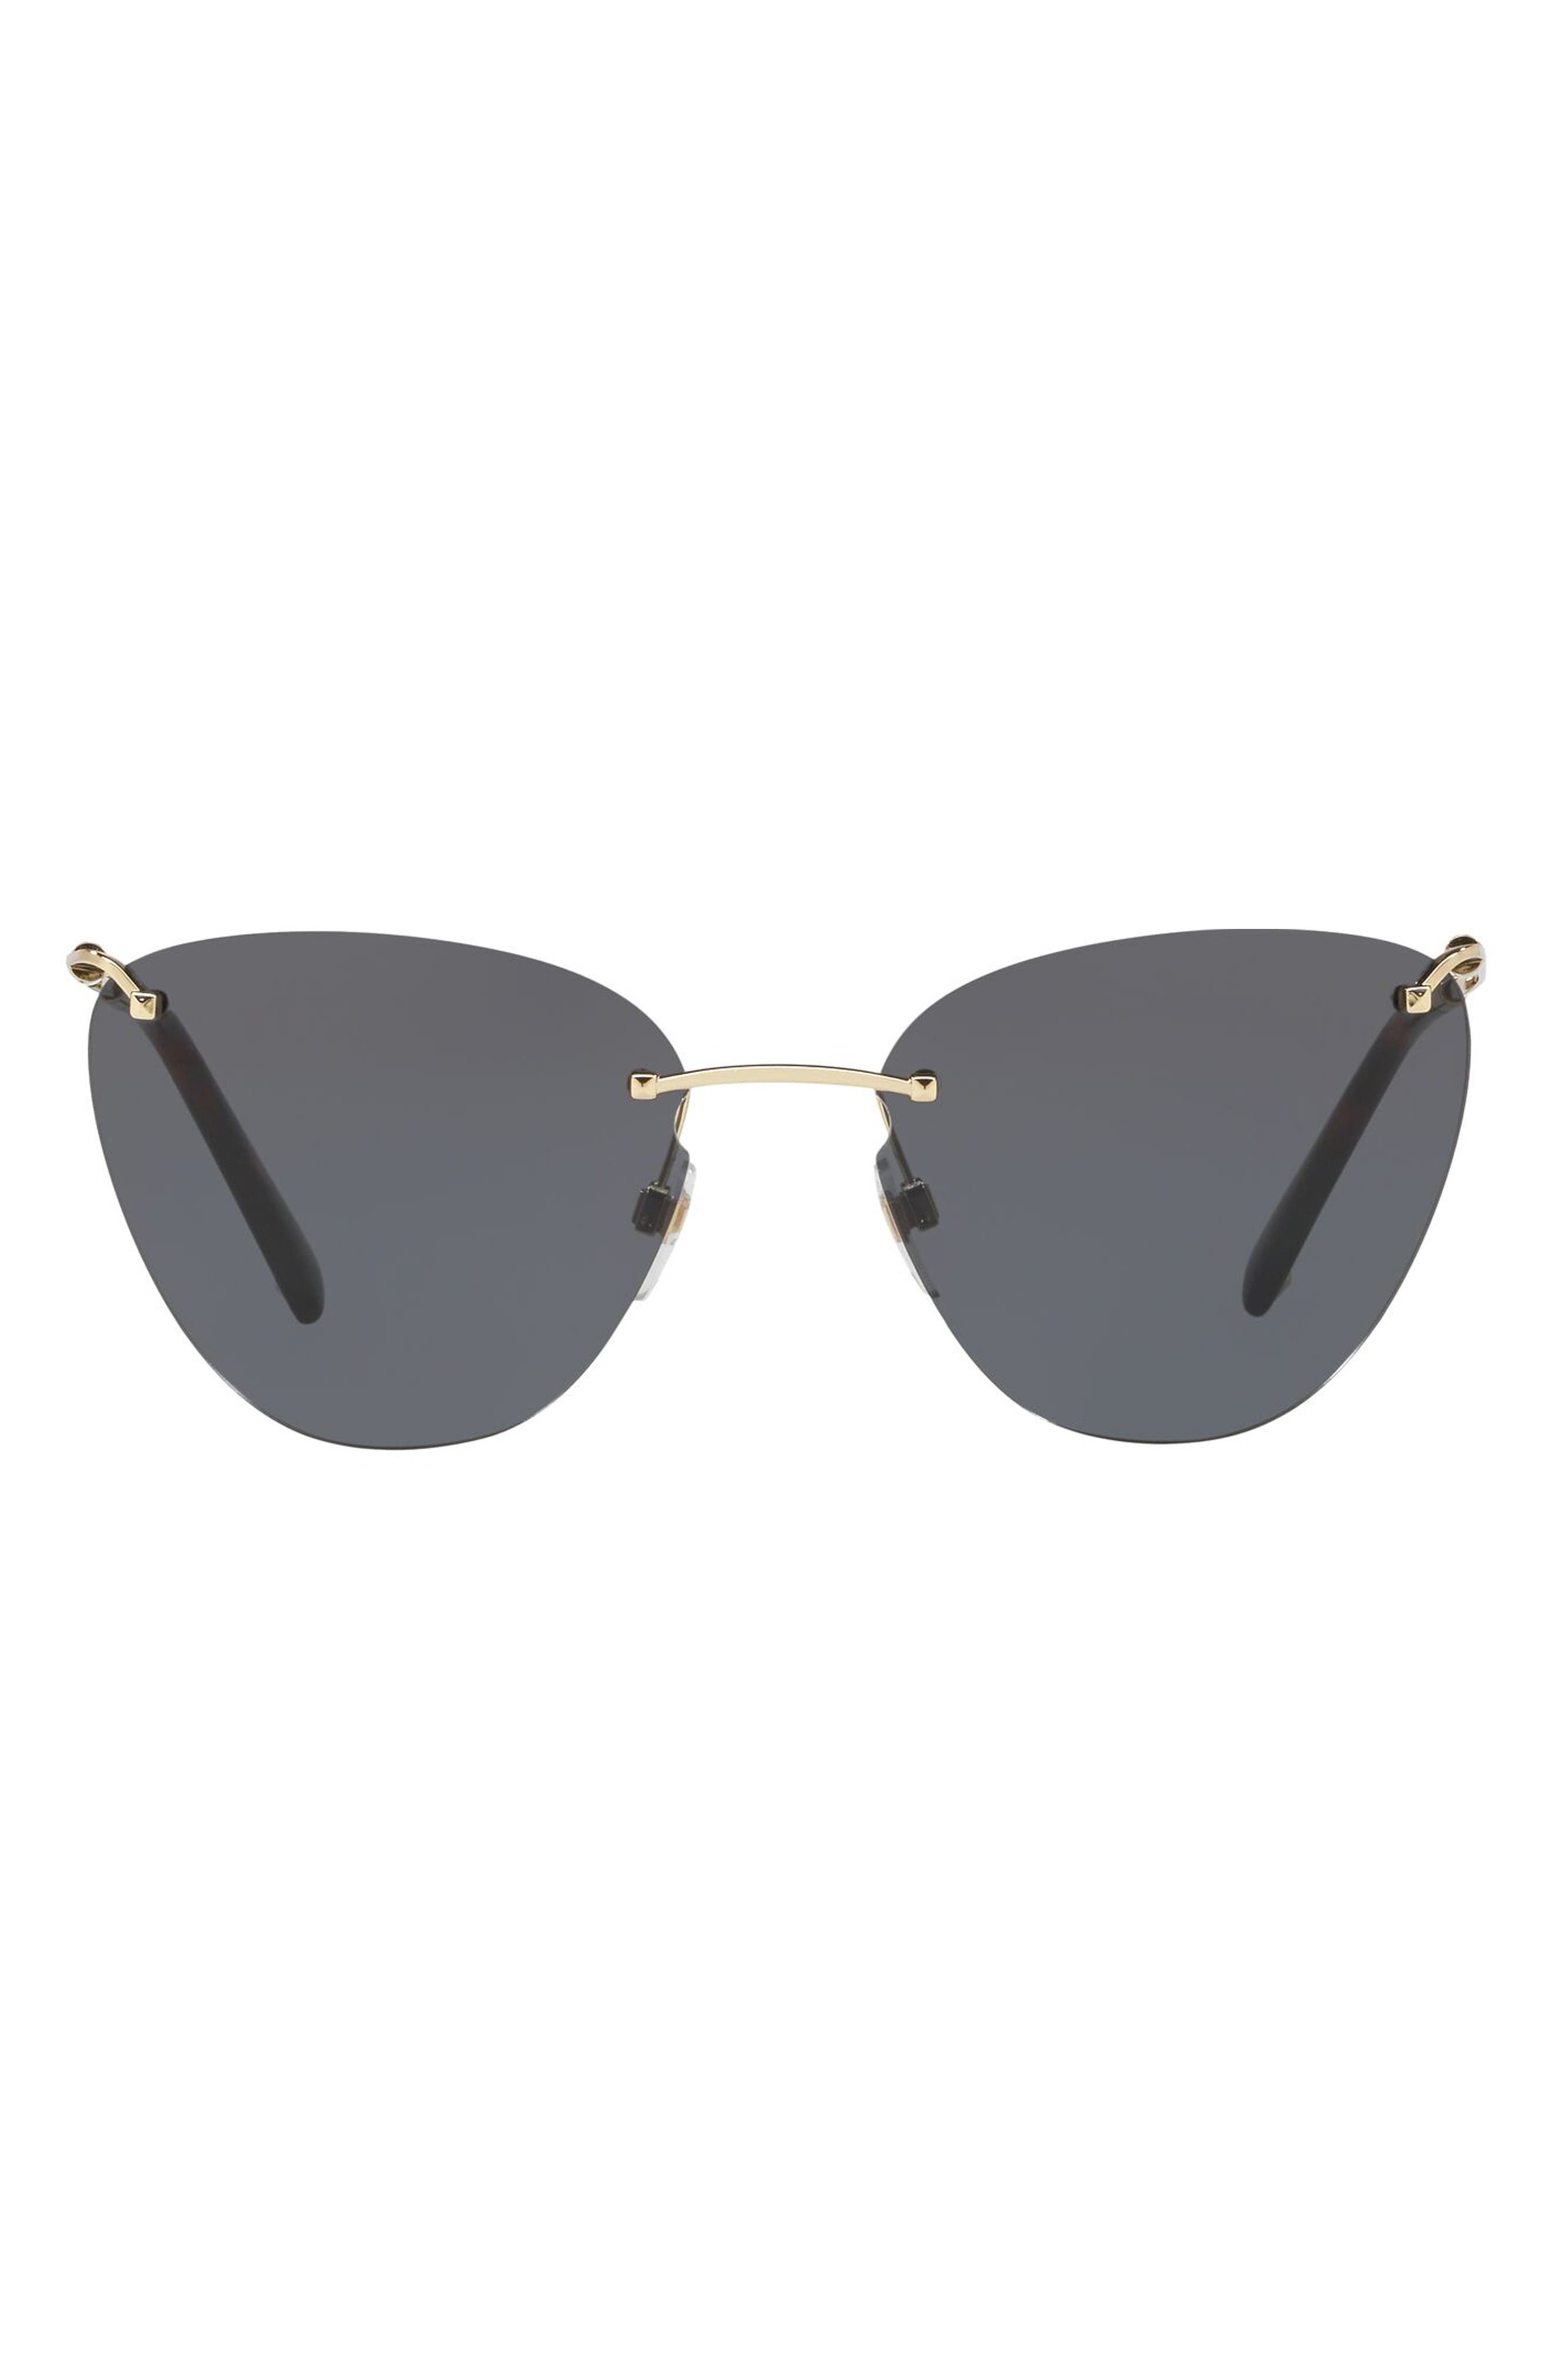 Valentino 58mm Pilot Sunglasses in Grey/Gold Solid at Nordstrom